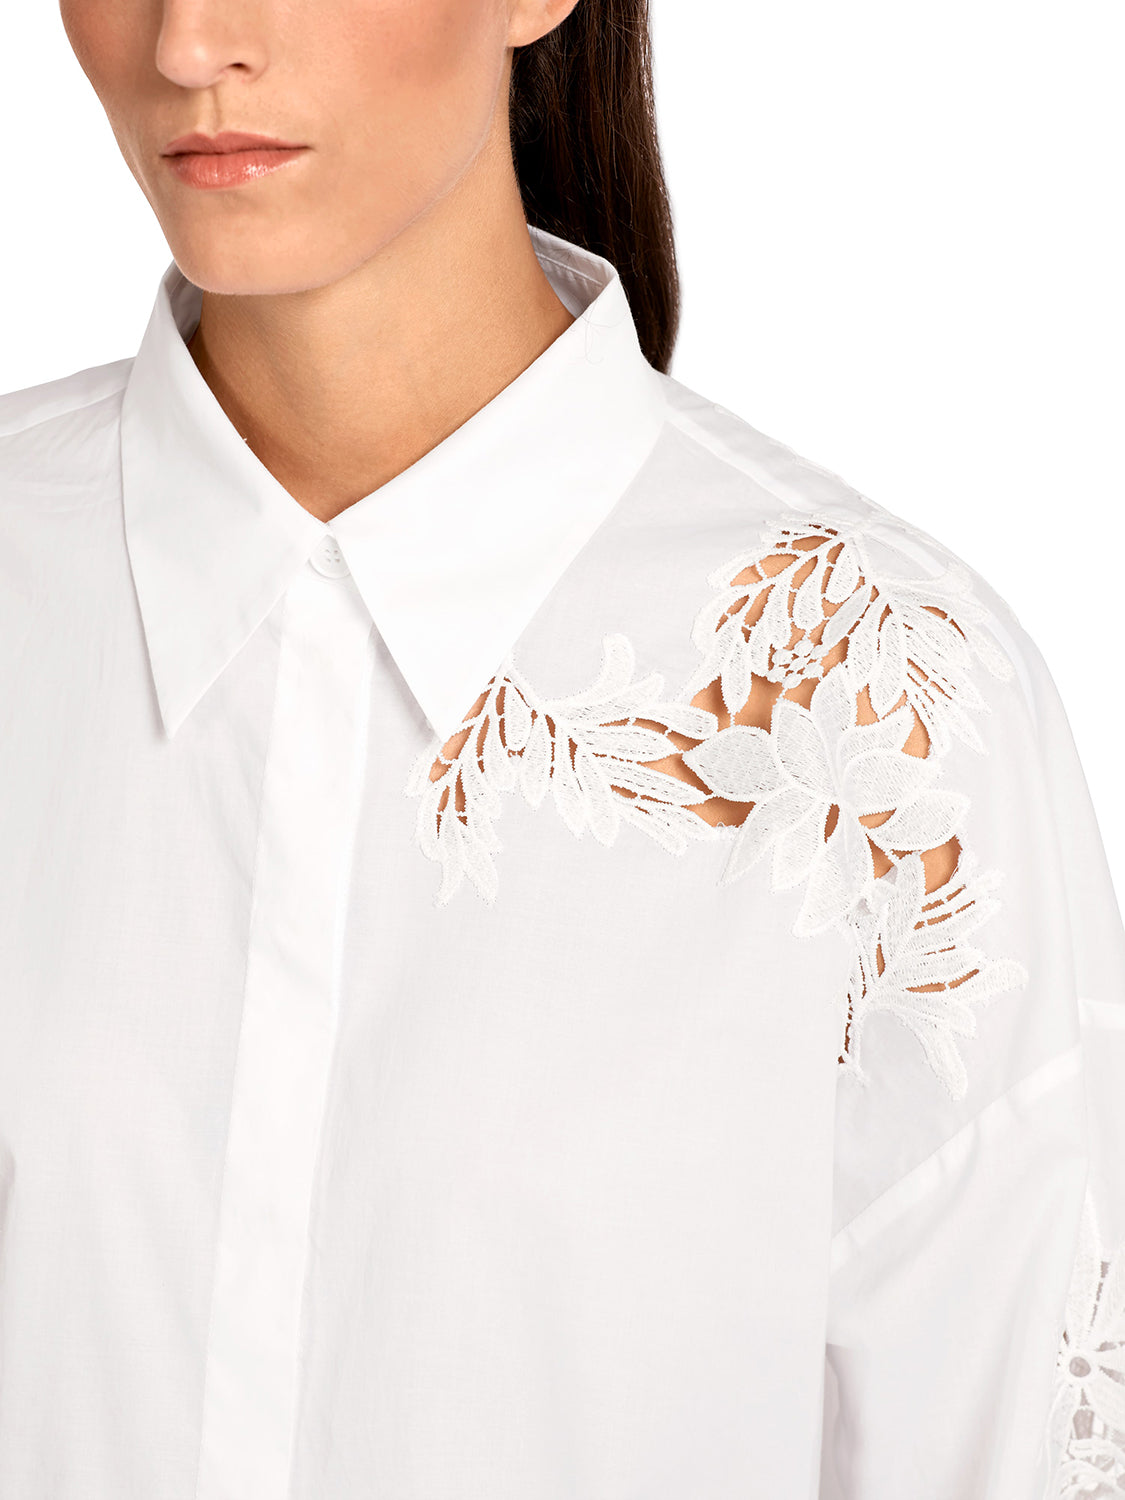 MarcCain Blouse with Broderie Anglaise UC5142W61